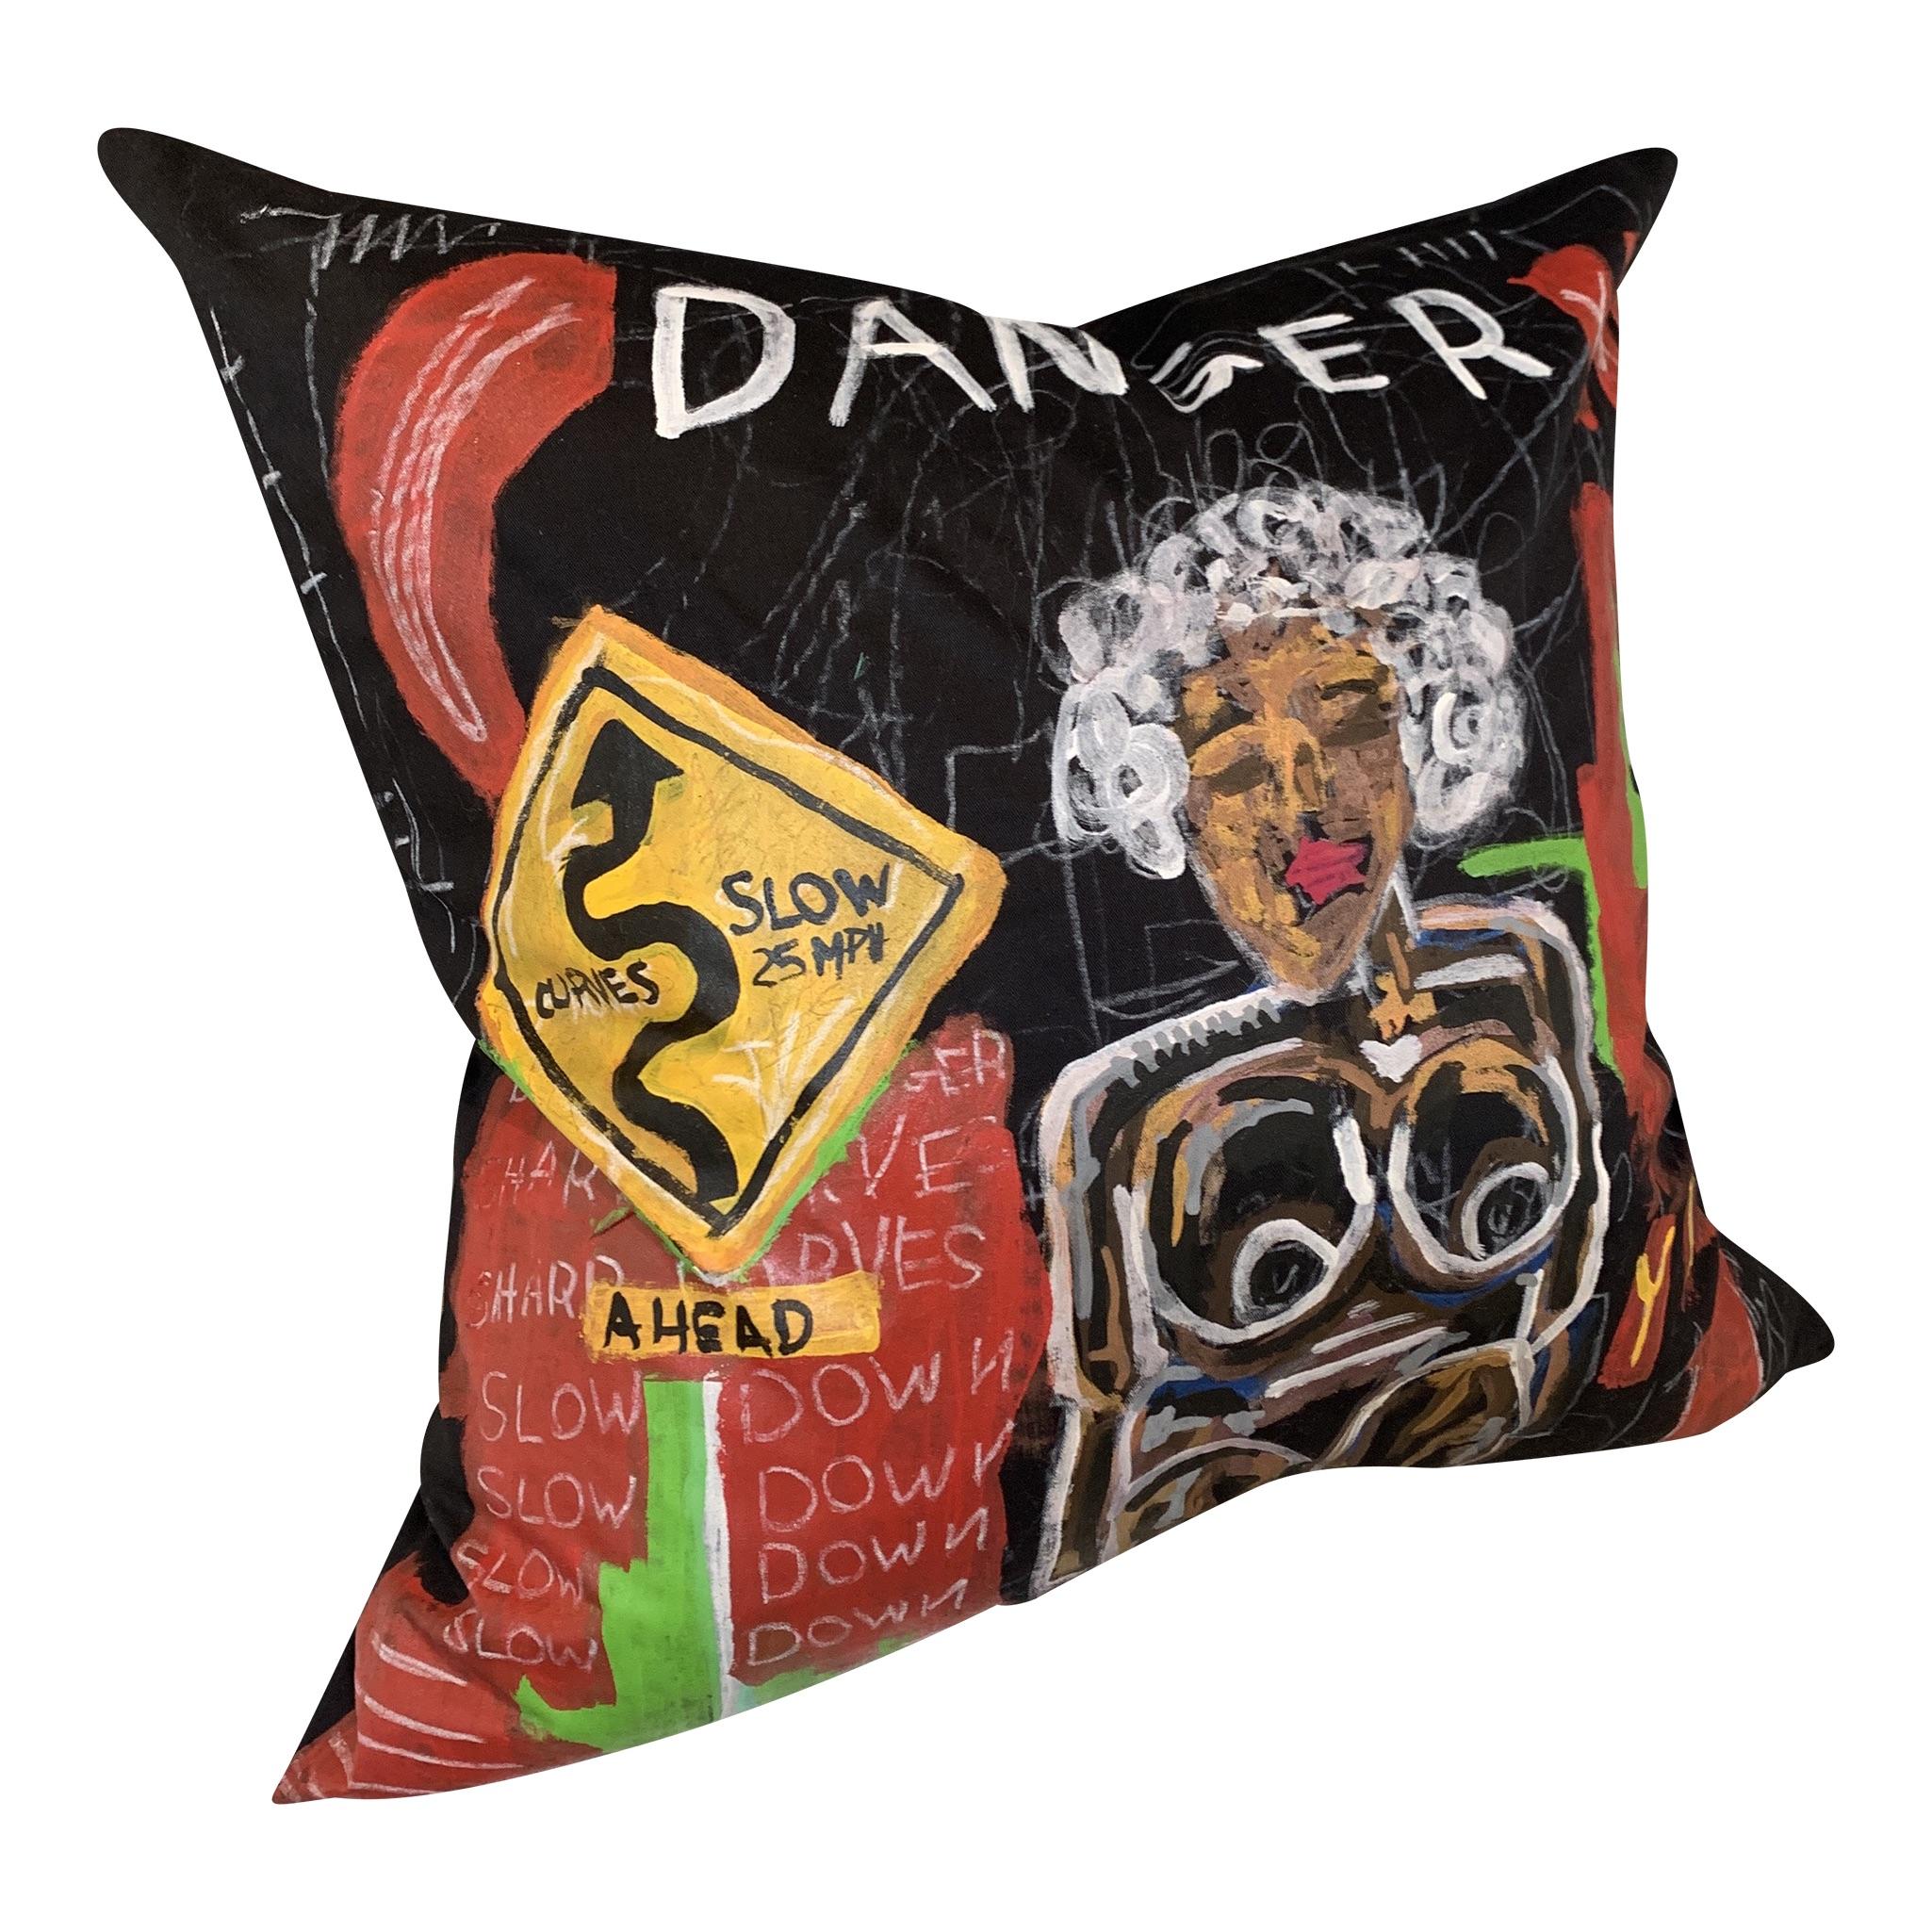 Basquiat Inspired Handpainted Pillow Art - Mixed Media Art by Unknown